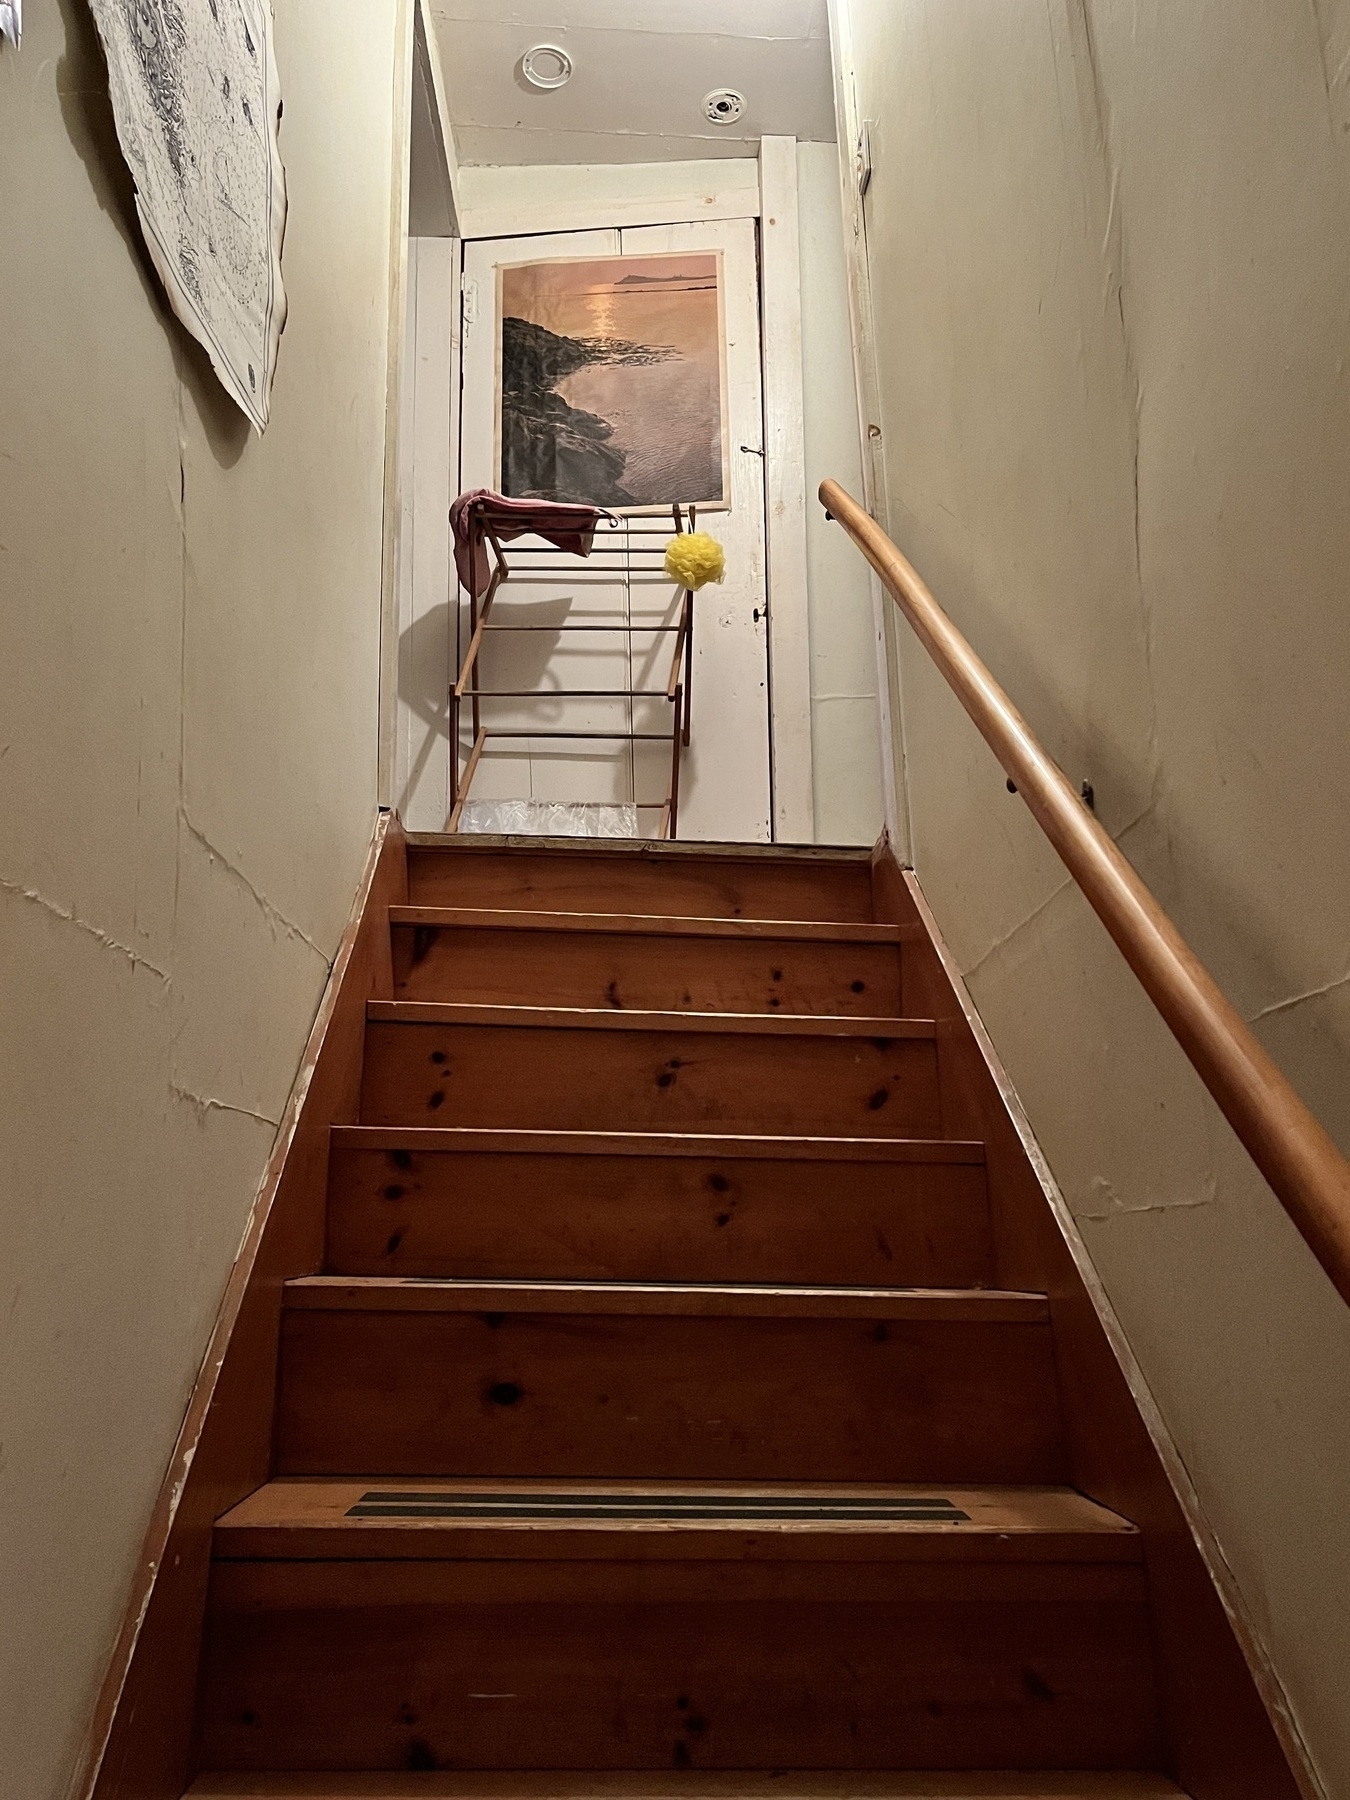 Looking up a steep staircase with wooden clothes drying rack at the top. Wooden handrail on the right. 